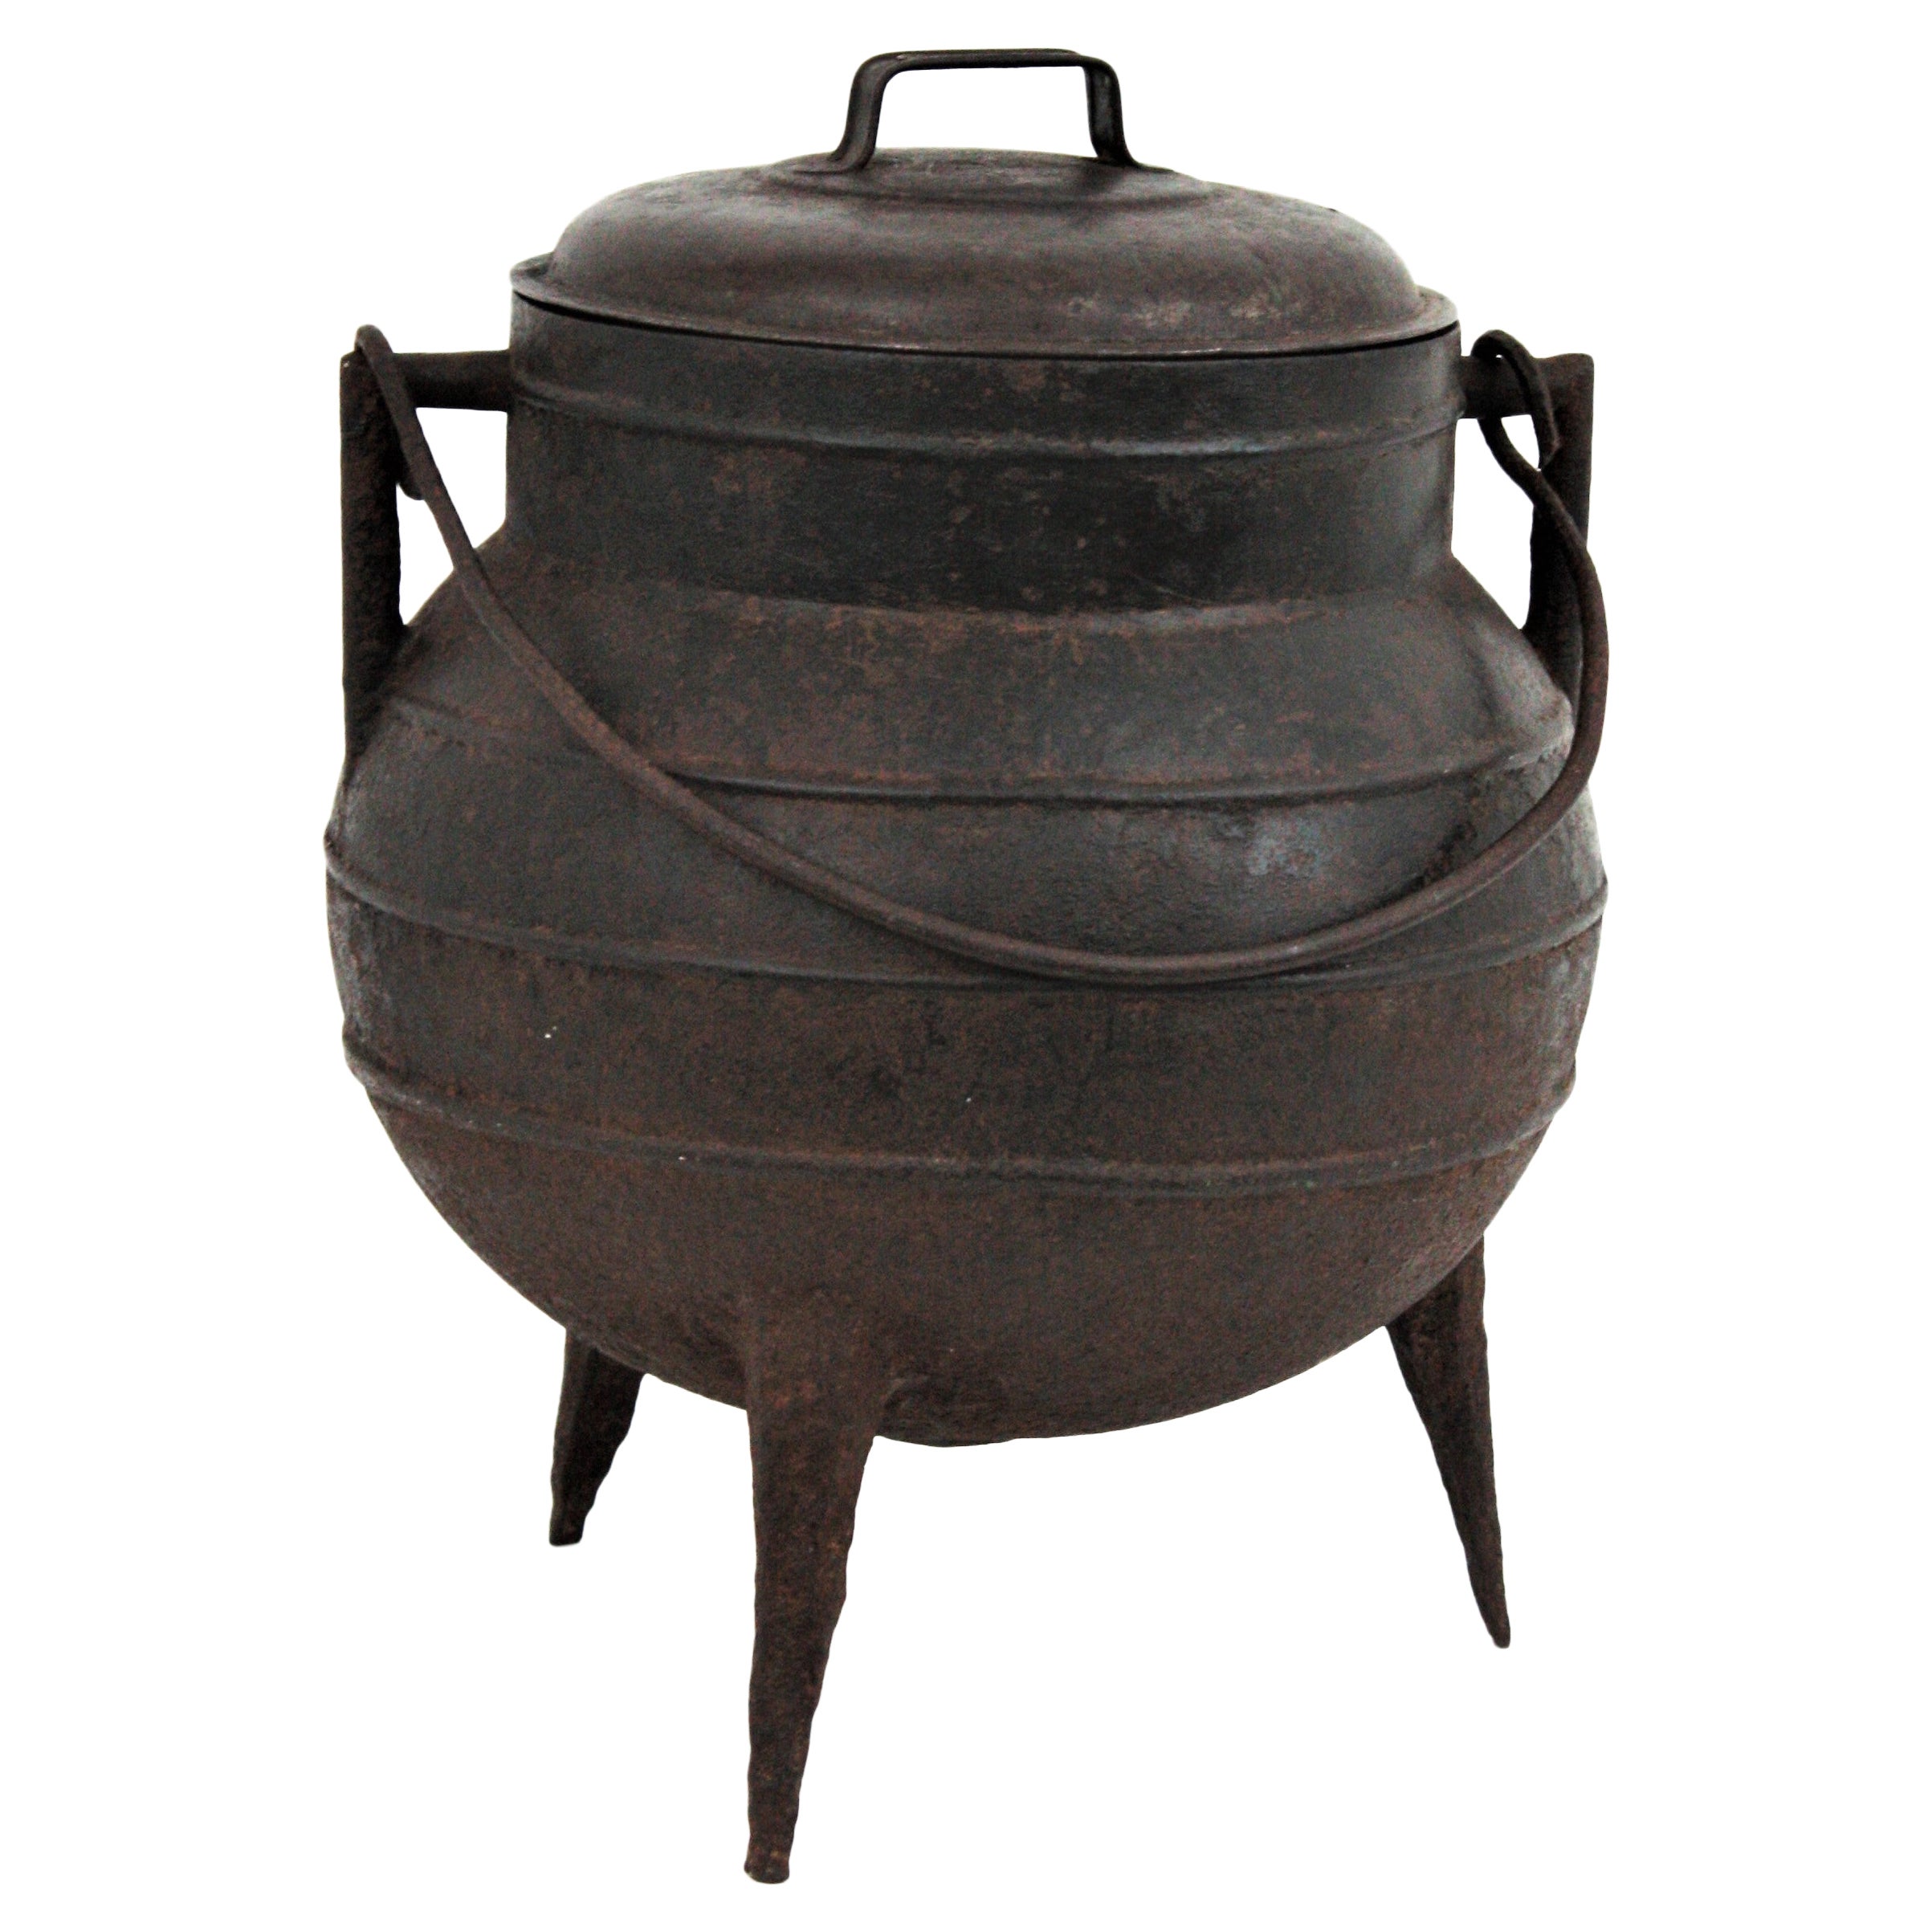 Cast iron cauldron with unmatching Lid from Galicia at the northern part of Spain, circa 1940s
Made in molded/cast iron, originally used for cooking. 
Beautiful to be displayed in a kitchen or near a ground fire pit in any countryside, rustic or